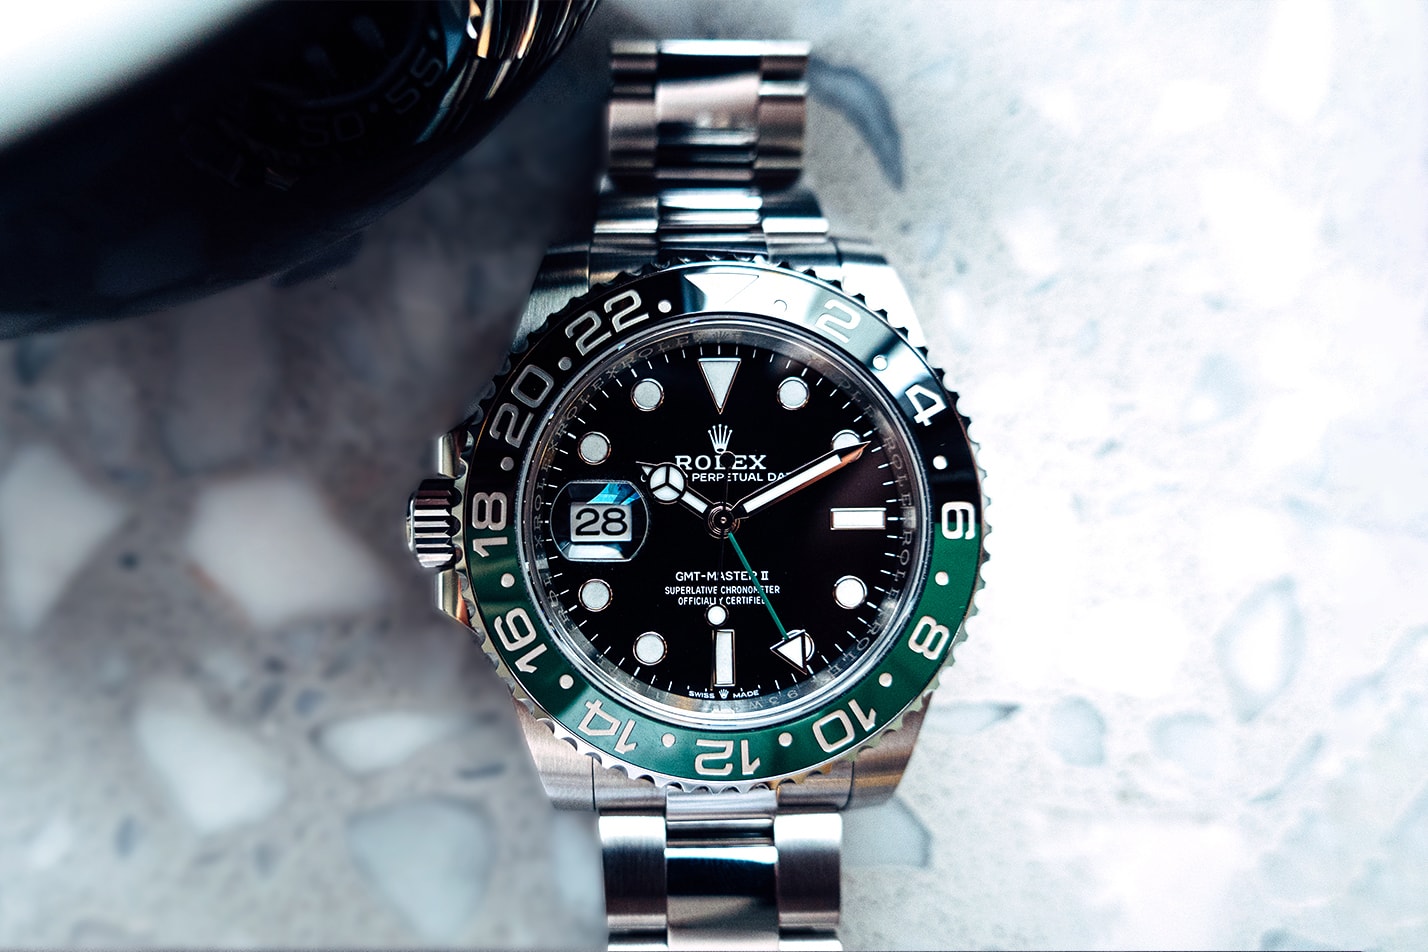 Rolex left-handed GMT-Master II Air King Destro Turdor Black Bay Pro Grey and Patina Bobs Watches Fog City Vintage Round Table 126900 126720VTNR